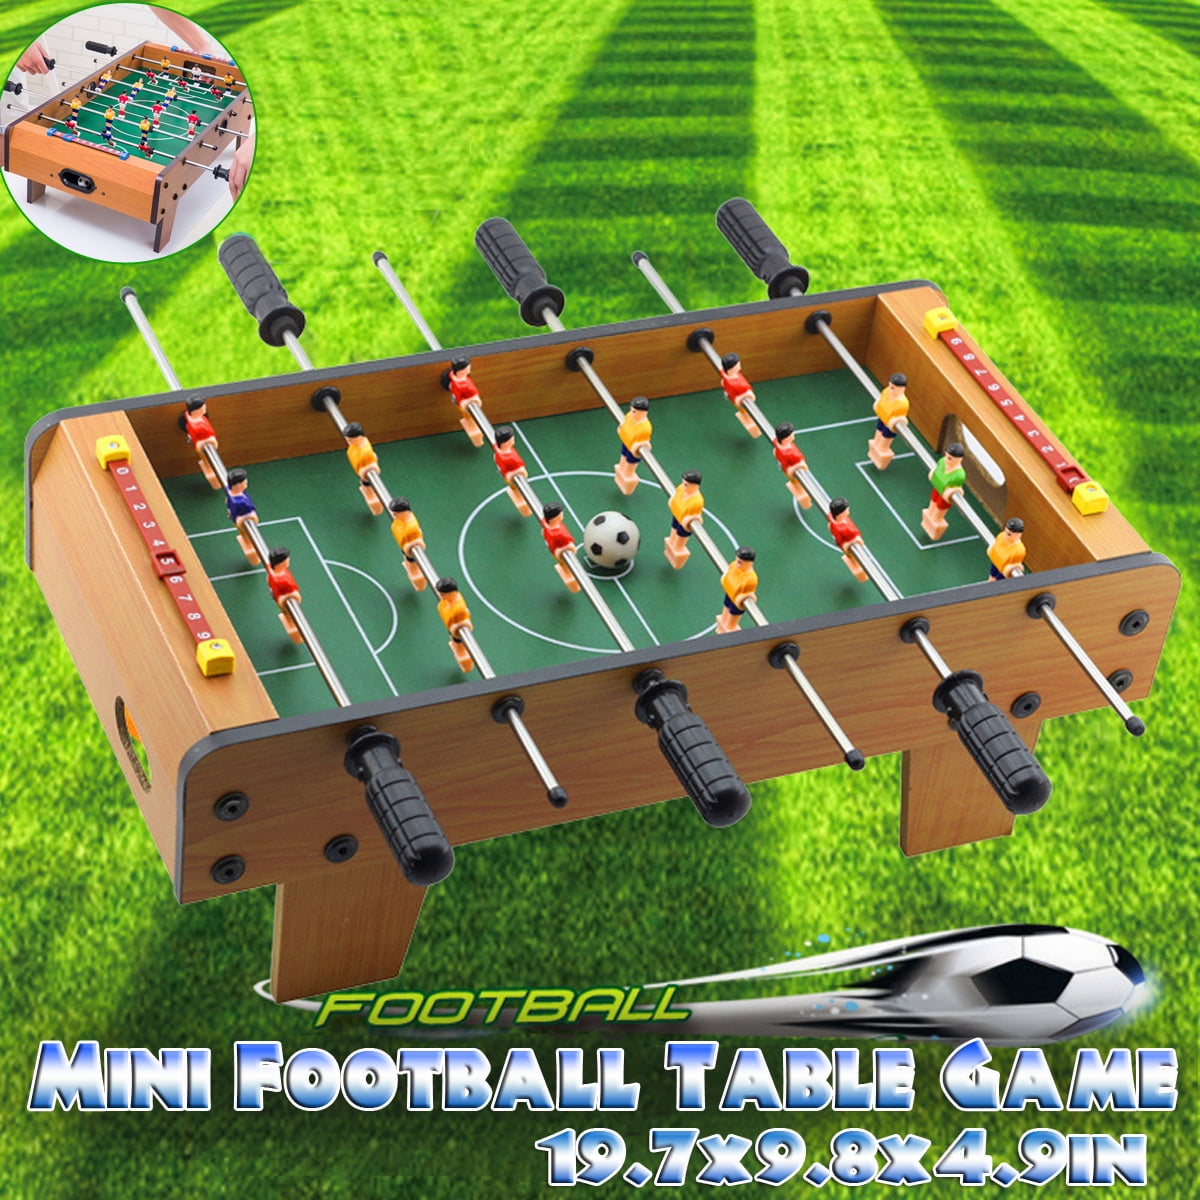 Mini Size Family Night Arcades Bars Portable Recreational Hand Soccer for Game Rooms Foosball Soccer Tabletops Soccer Fun Kikunum Football Tabletop Games and Accessories for Adults 